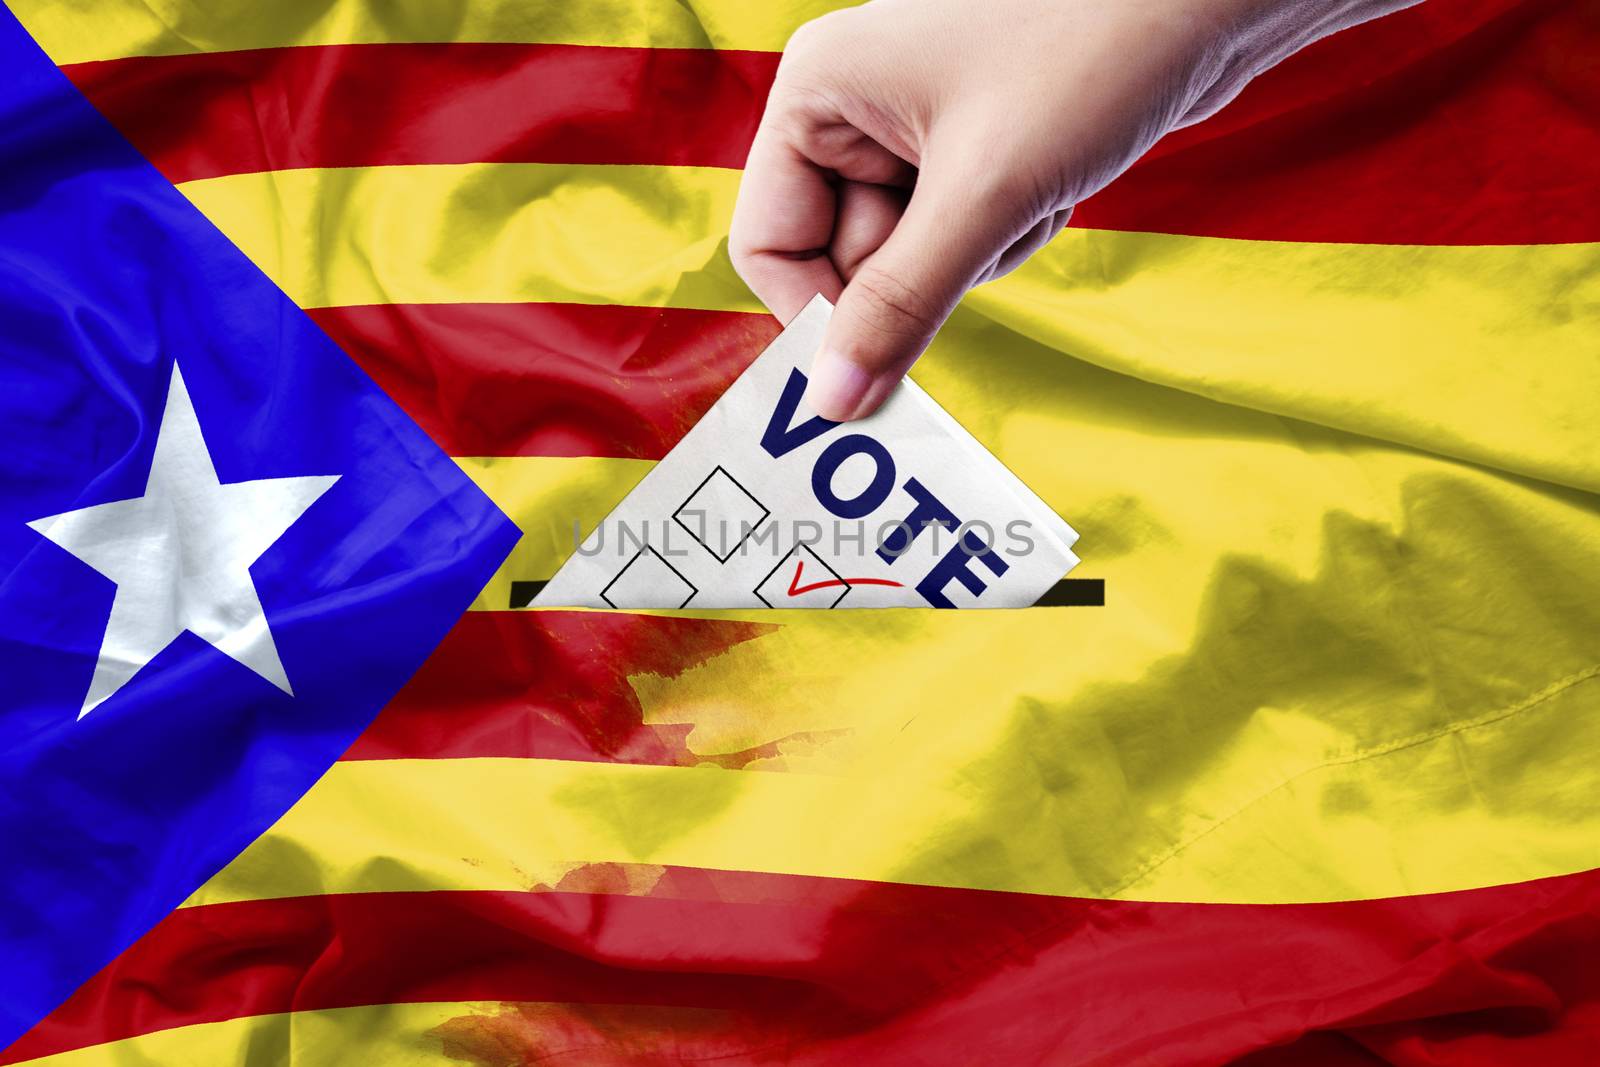 Vote referendum for Catalonia independence exit national crisis separatism risk : close up hand of a person casting a ballot at elections during voting on canvas Spain and Catalan flag background.